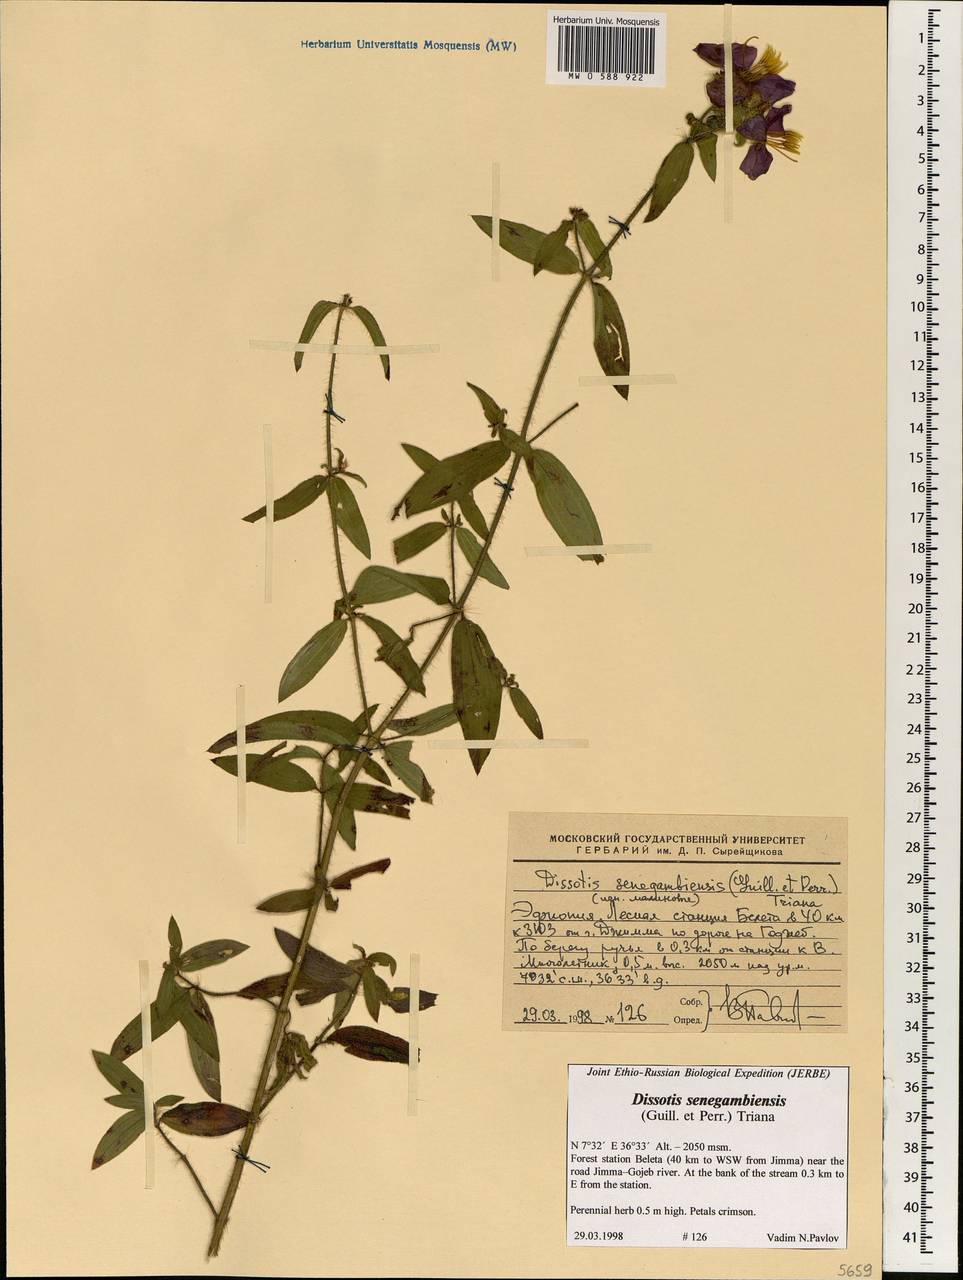 Antherotoma senegambiensis (Guill. & Perr.) H. Jacques-Félix, Africa (AFR) (Ethiopia)